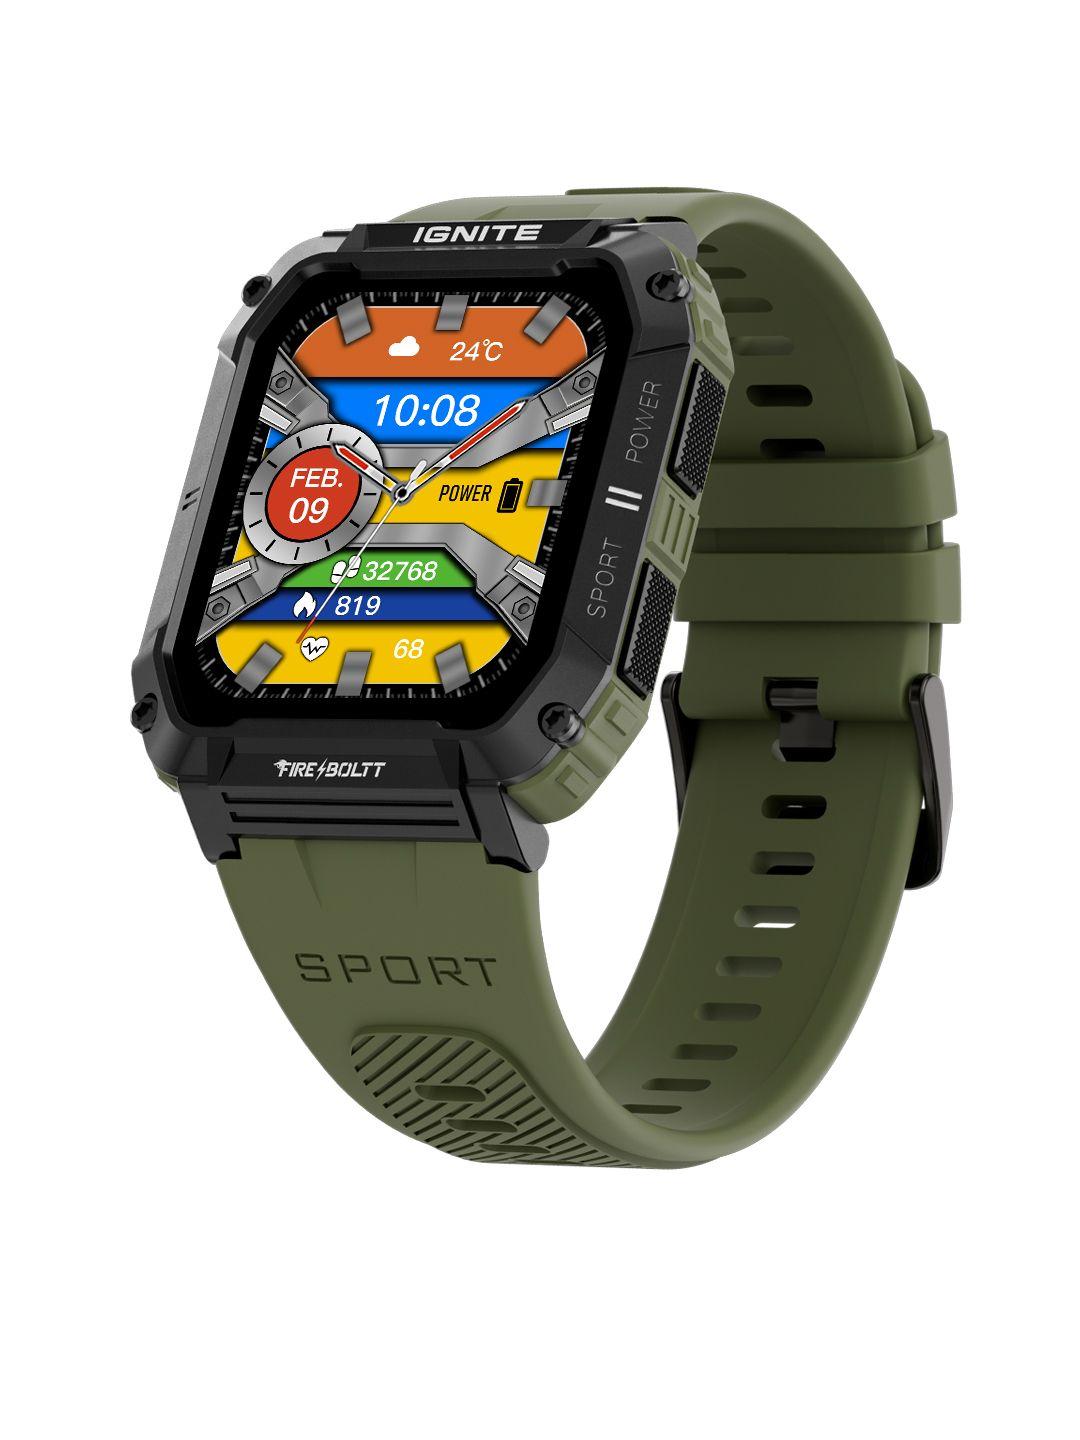 fire-boltt combat 1.96" large display rugged outdoor smartwatch with bt calling